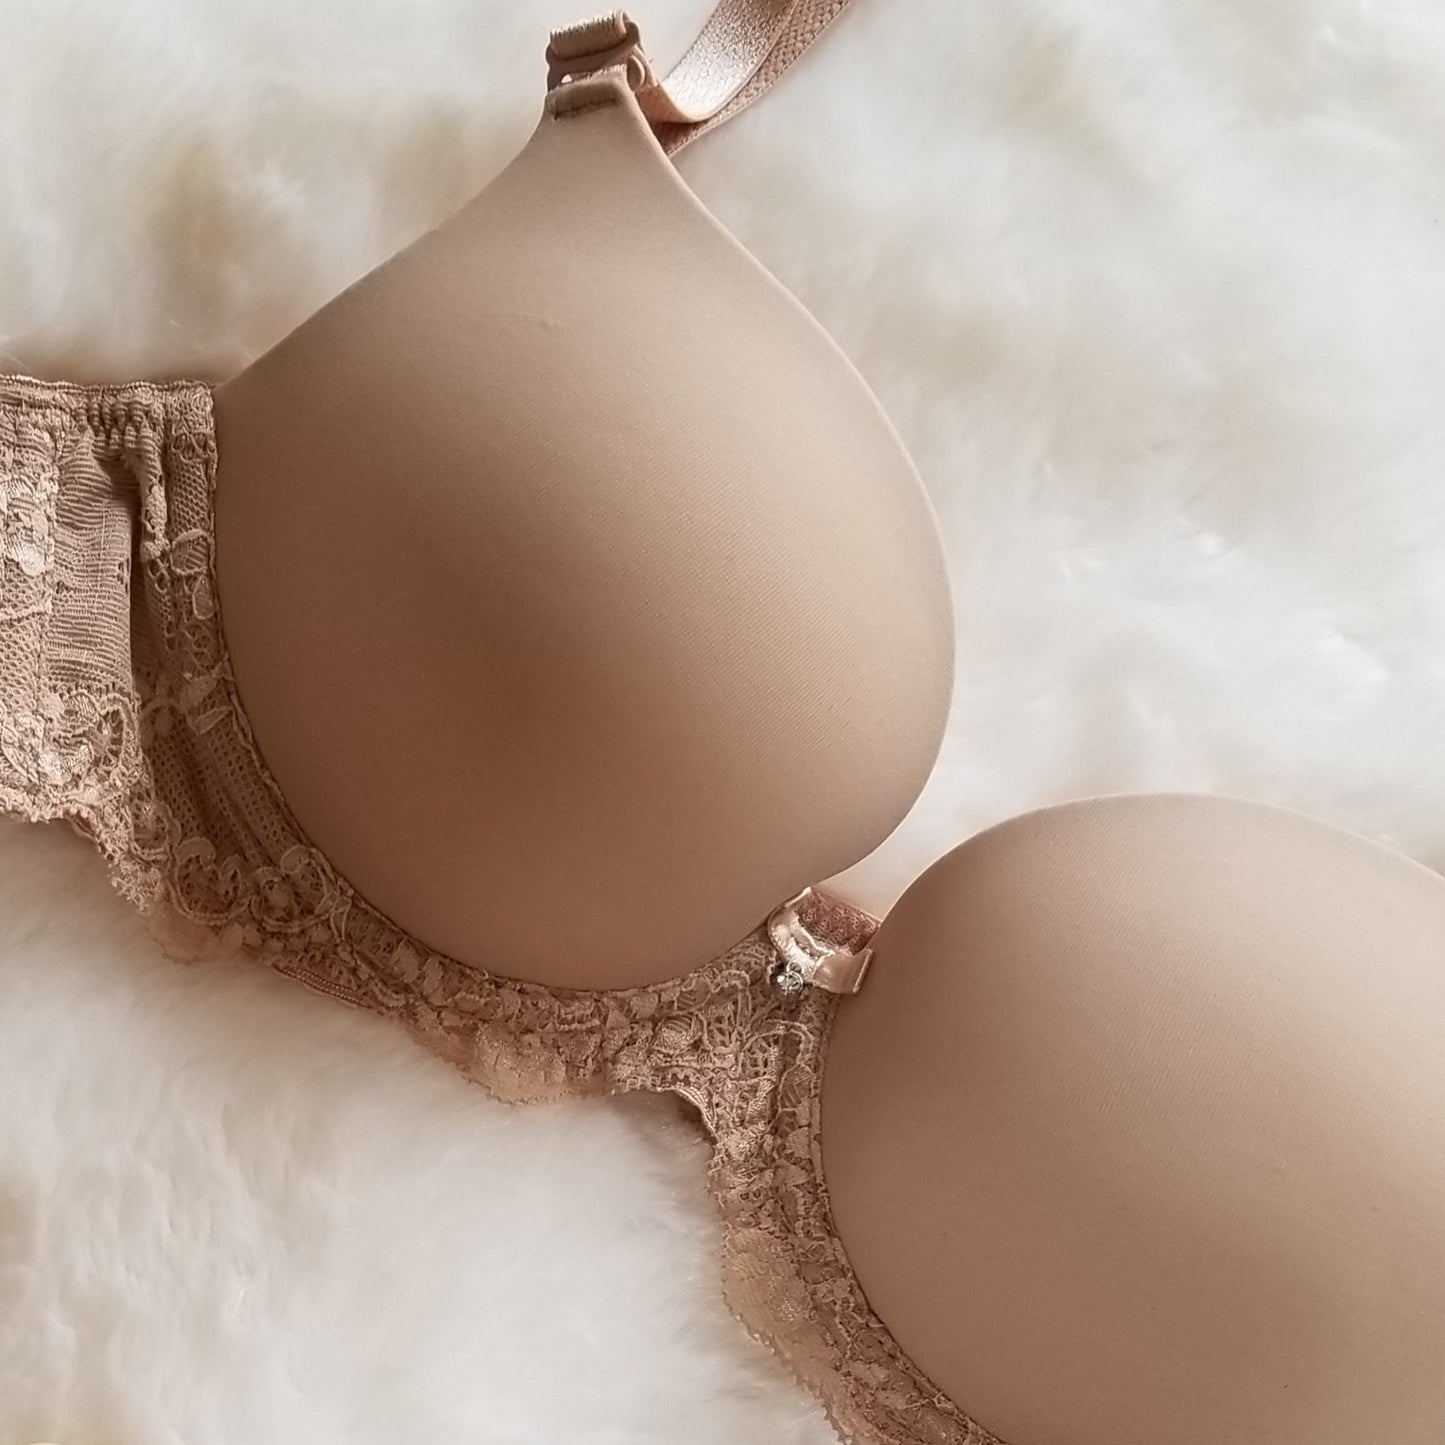 Molded Push Up Adamari Beige Smooth Cup Lace band Removable Straps